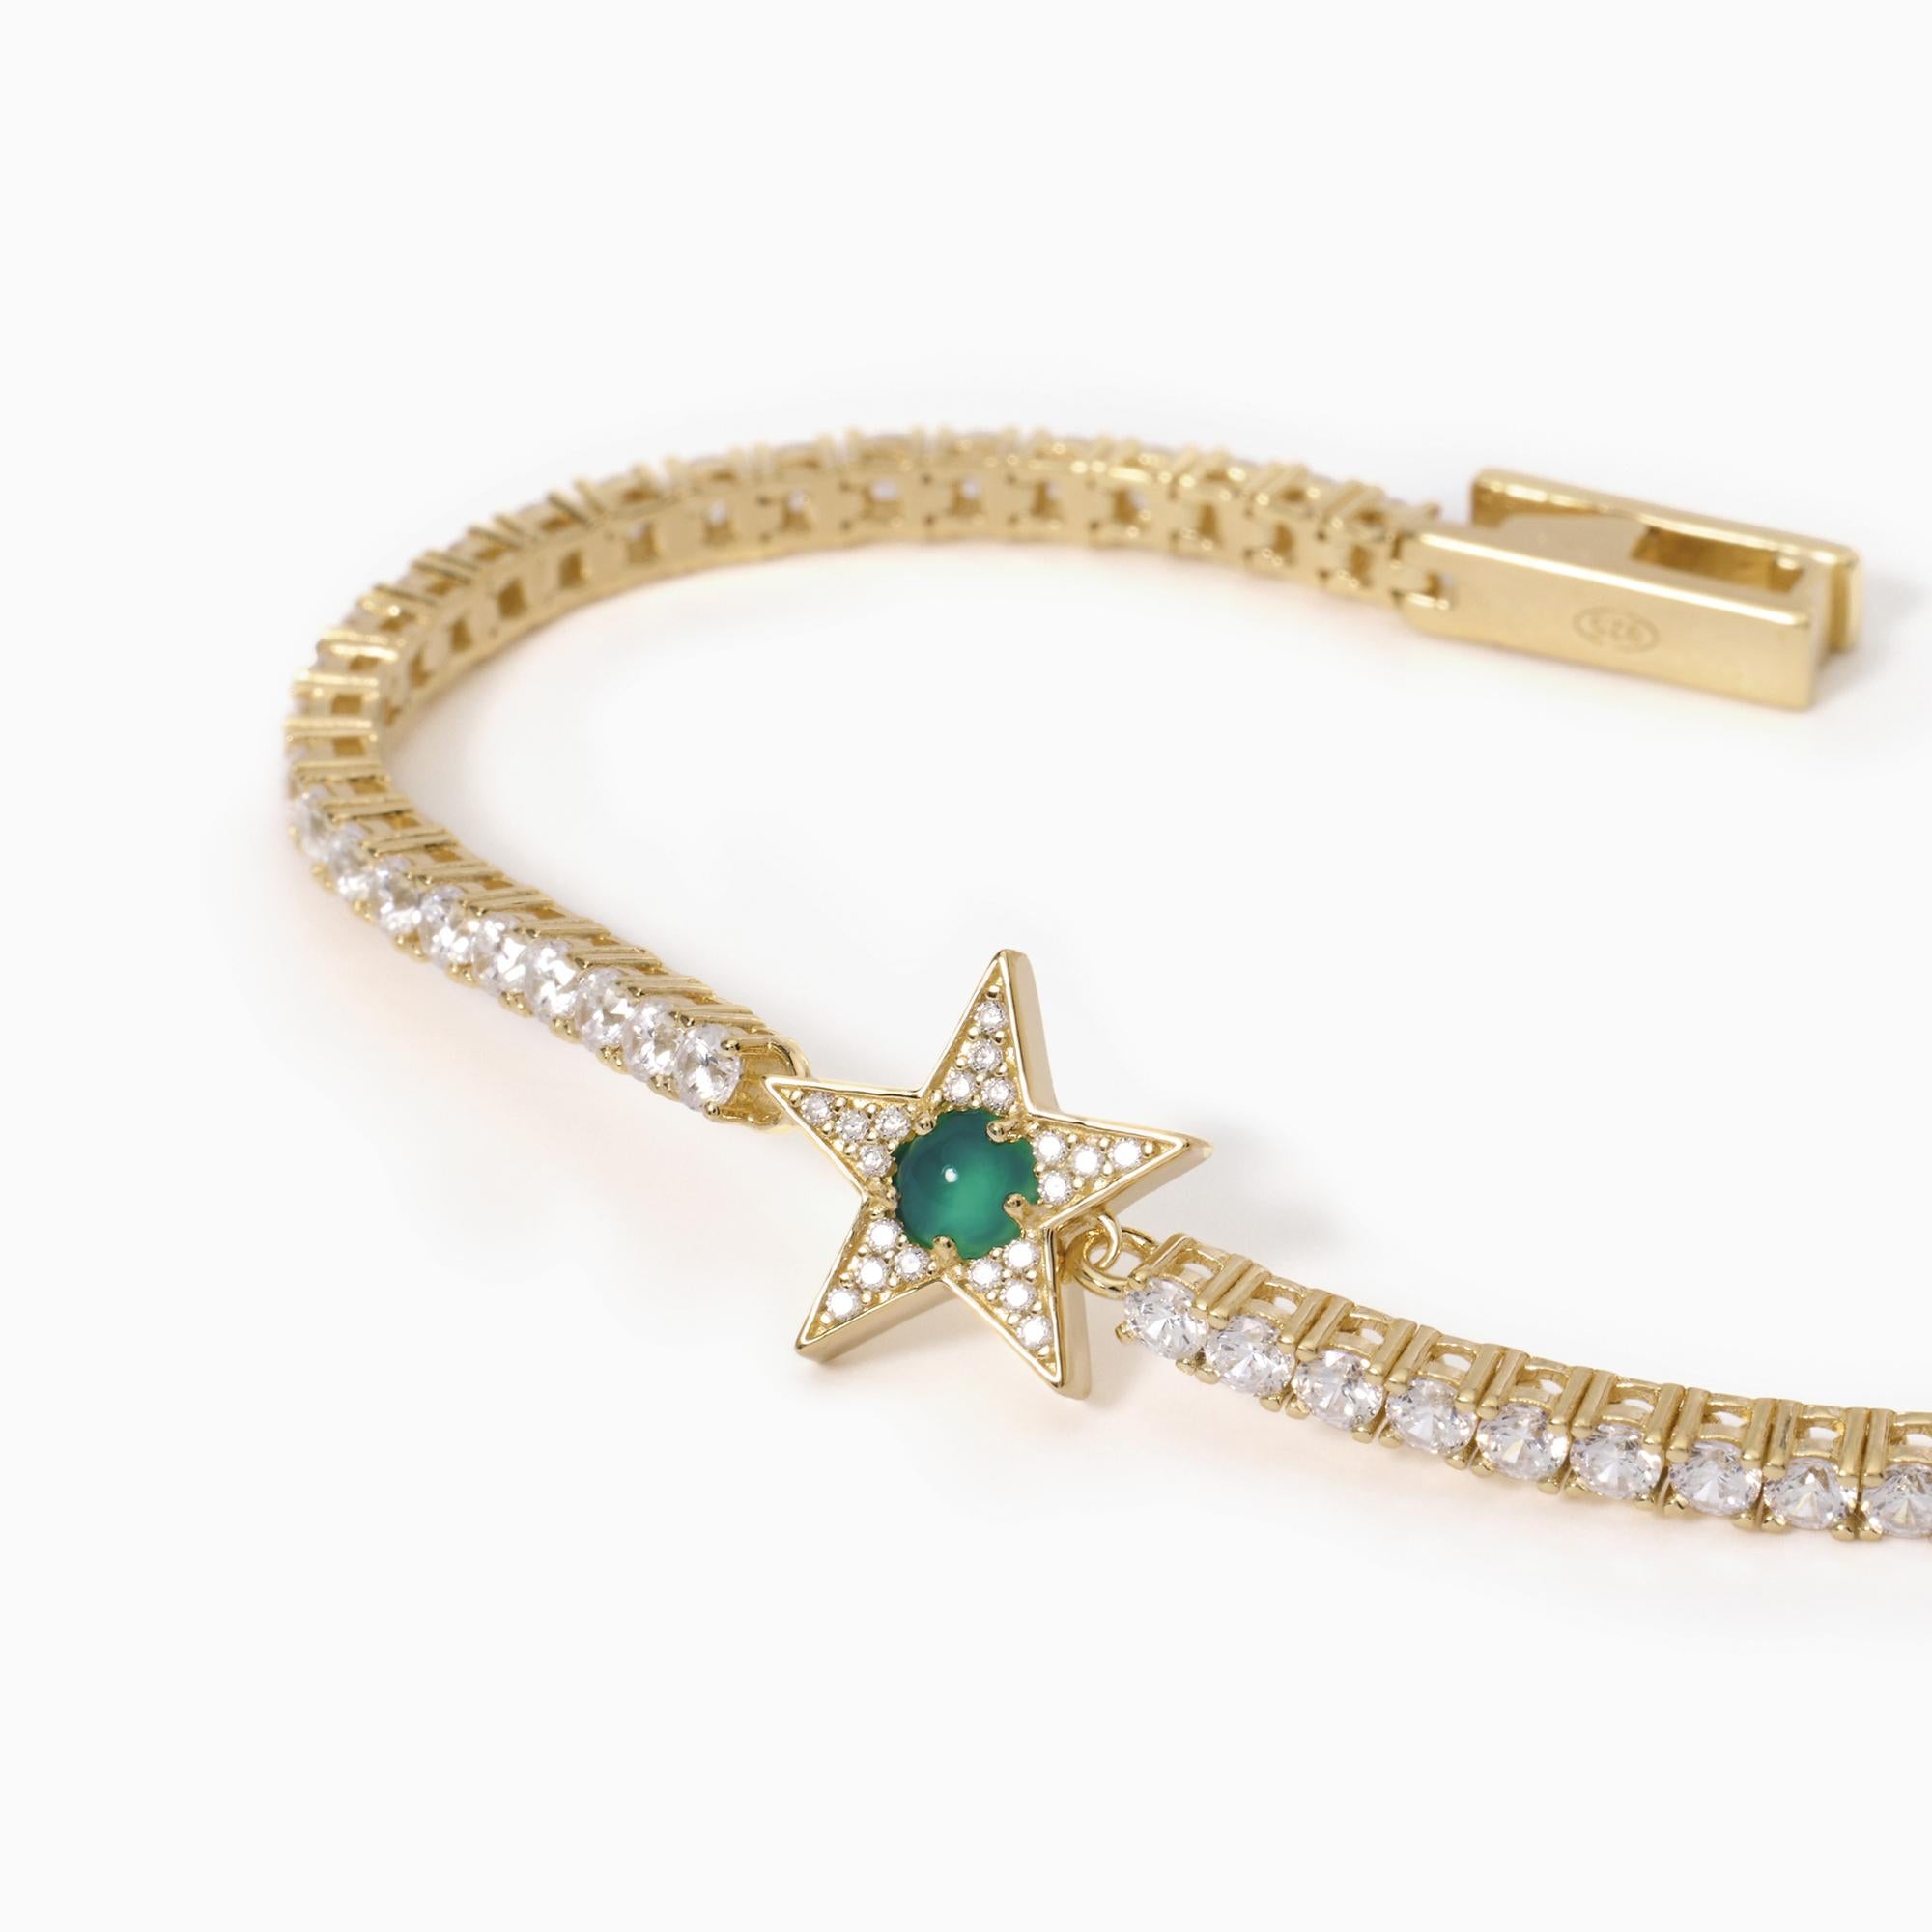 Mabina Woman - Golden star tennis bracelet with green agate STARLET - 533651-M